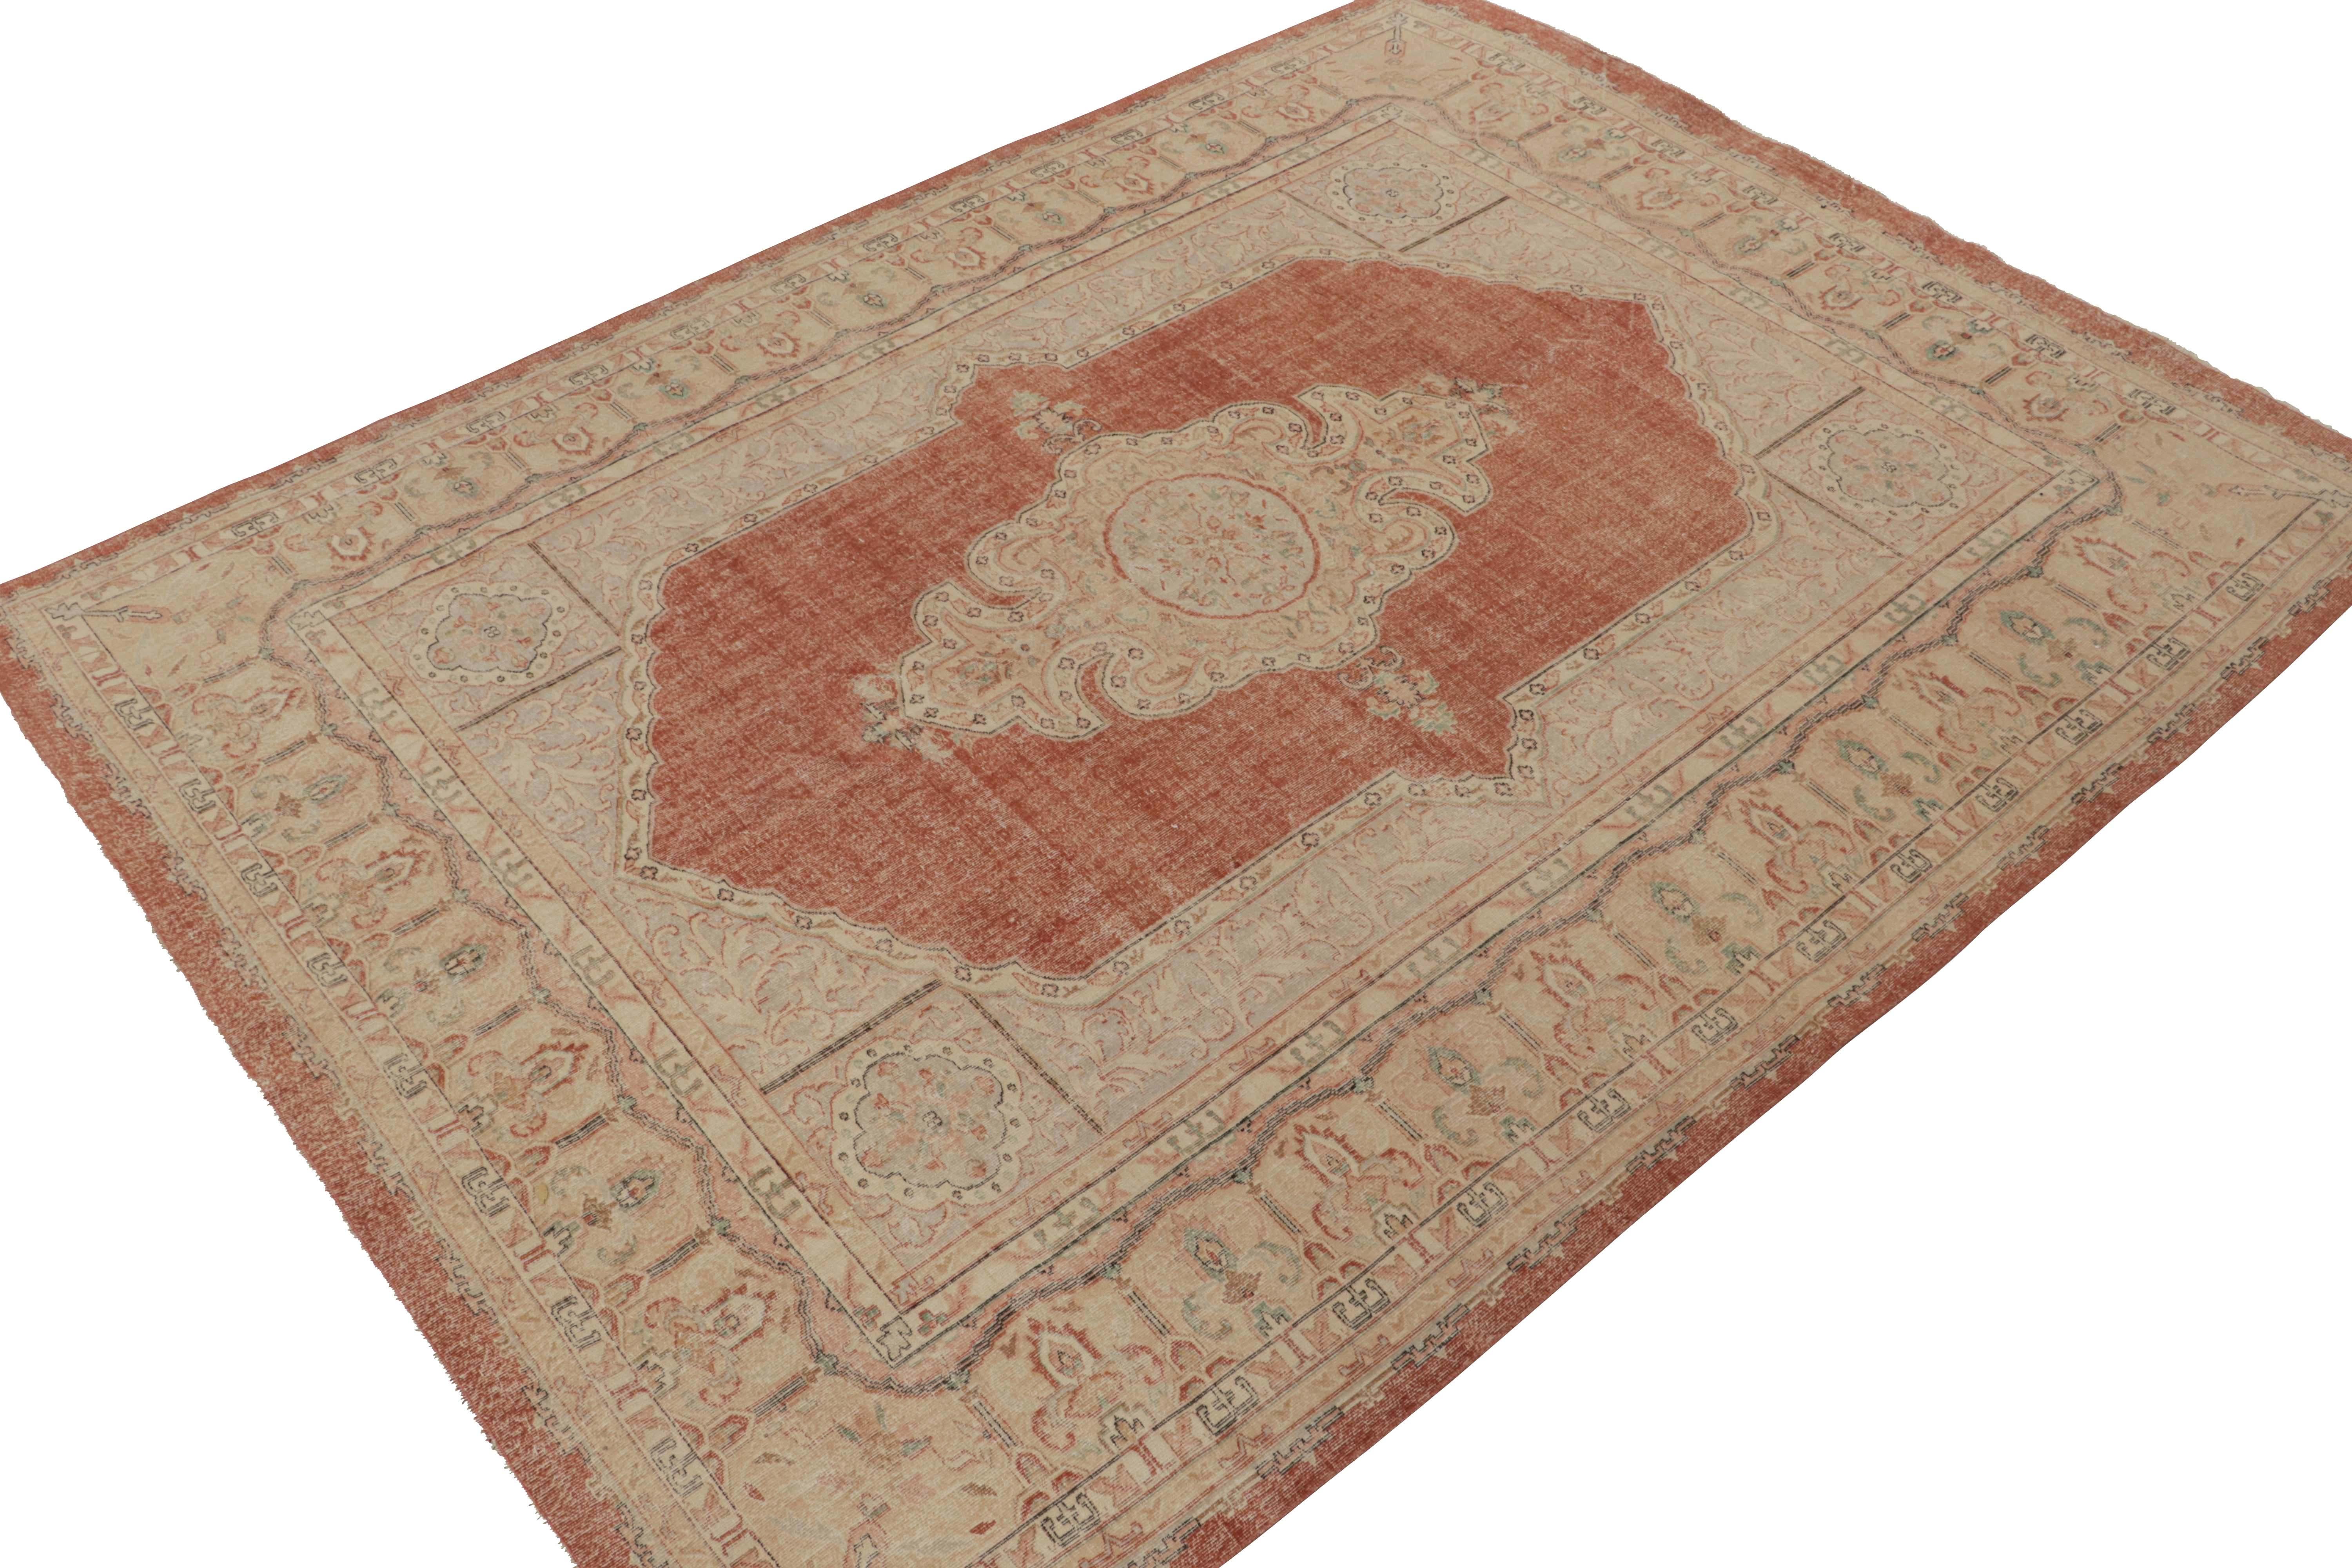 From Rug & Kilim’s classic Turkish selections, a 9x12 vintage Sivas rug, hand-knotted in wool circa 1950-1960. This gorgeous piece depicts an elegant floral medallion pattern in pink with beige and blue atop a beautiful rust red backdrop. Keen eyes